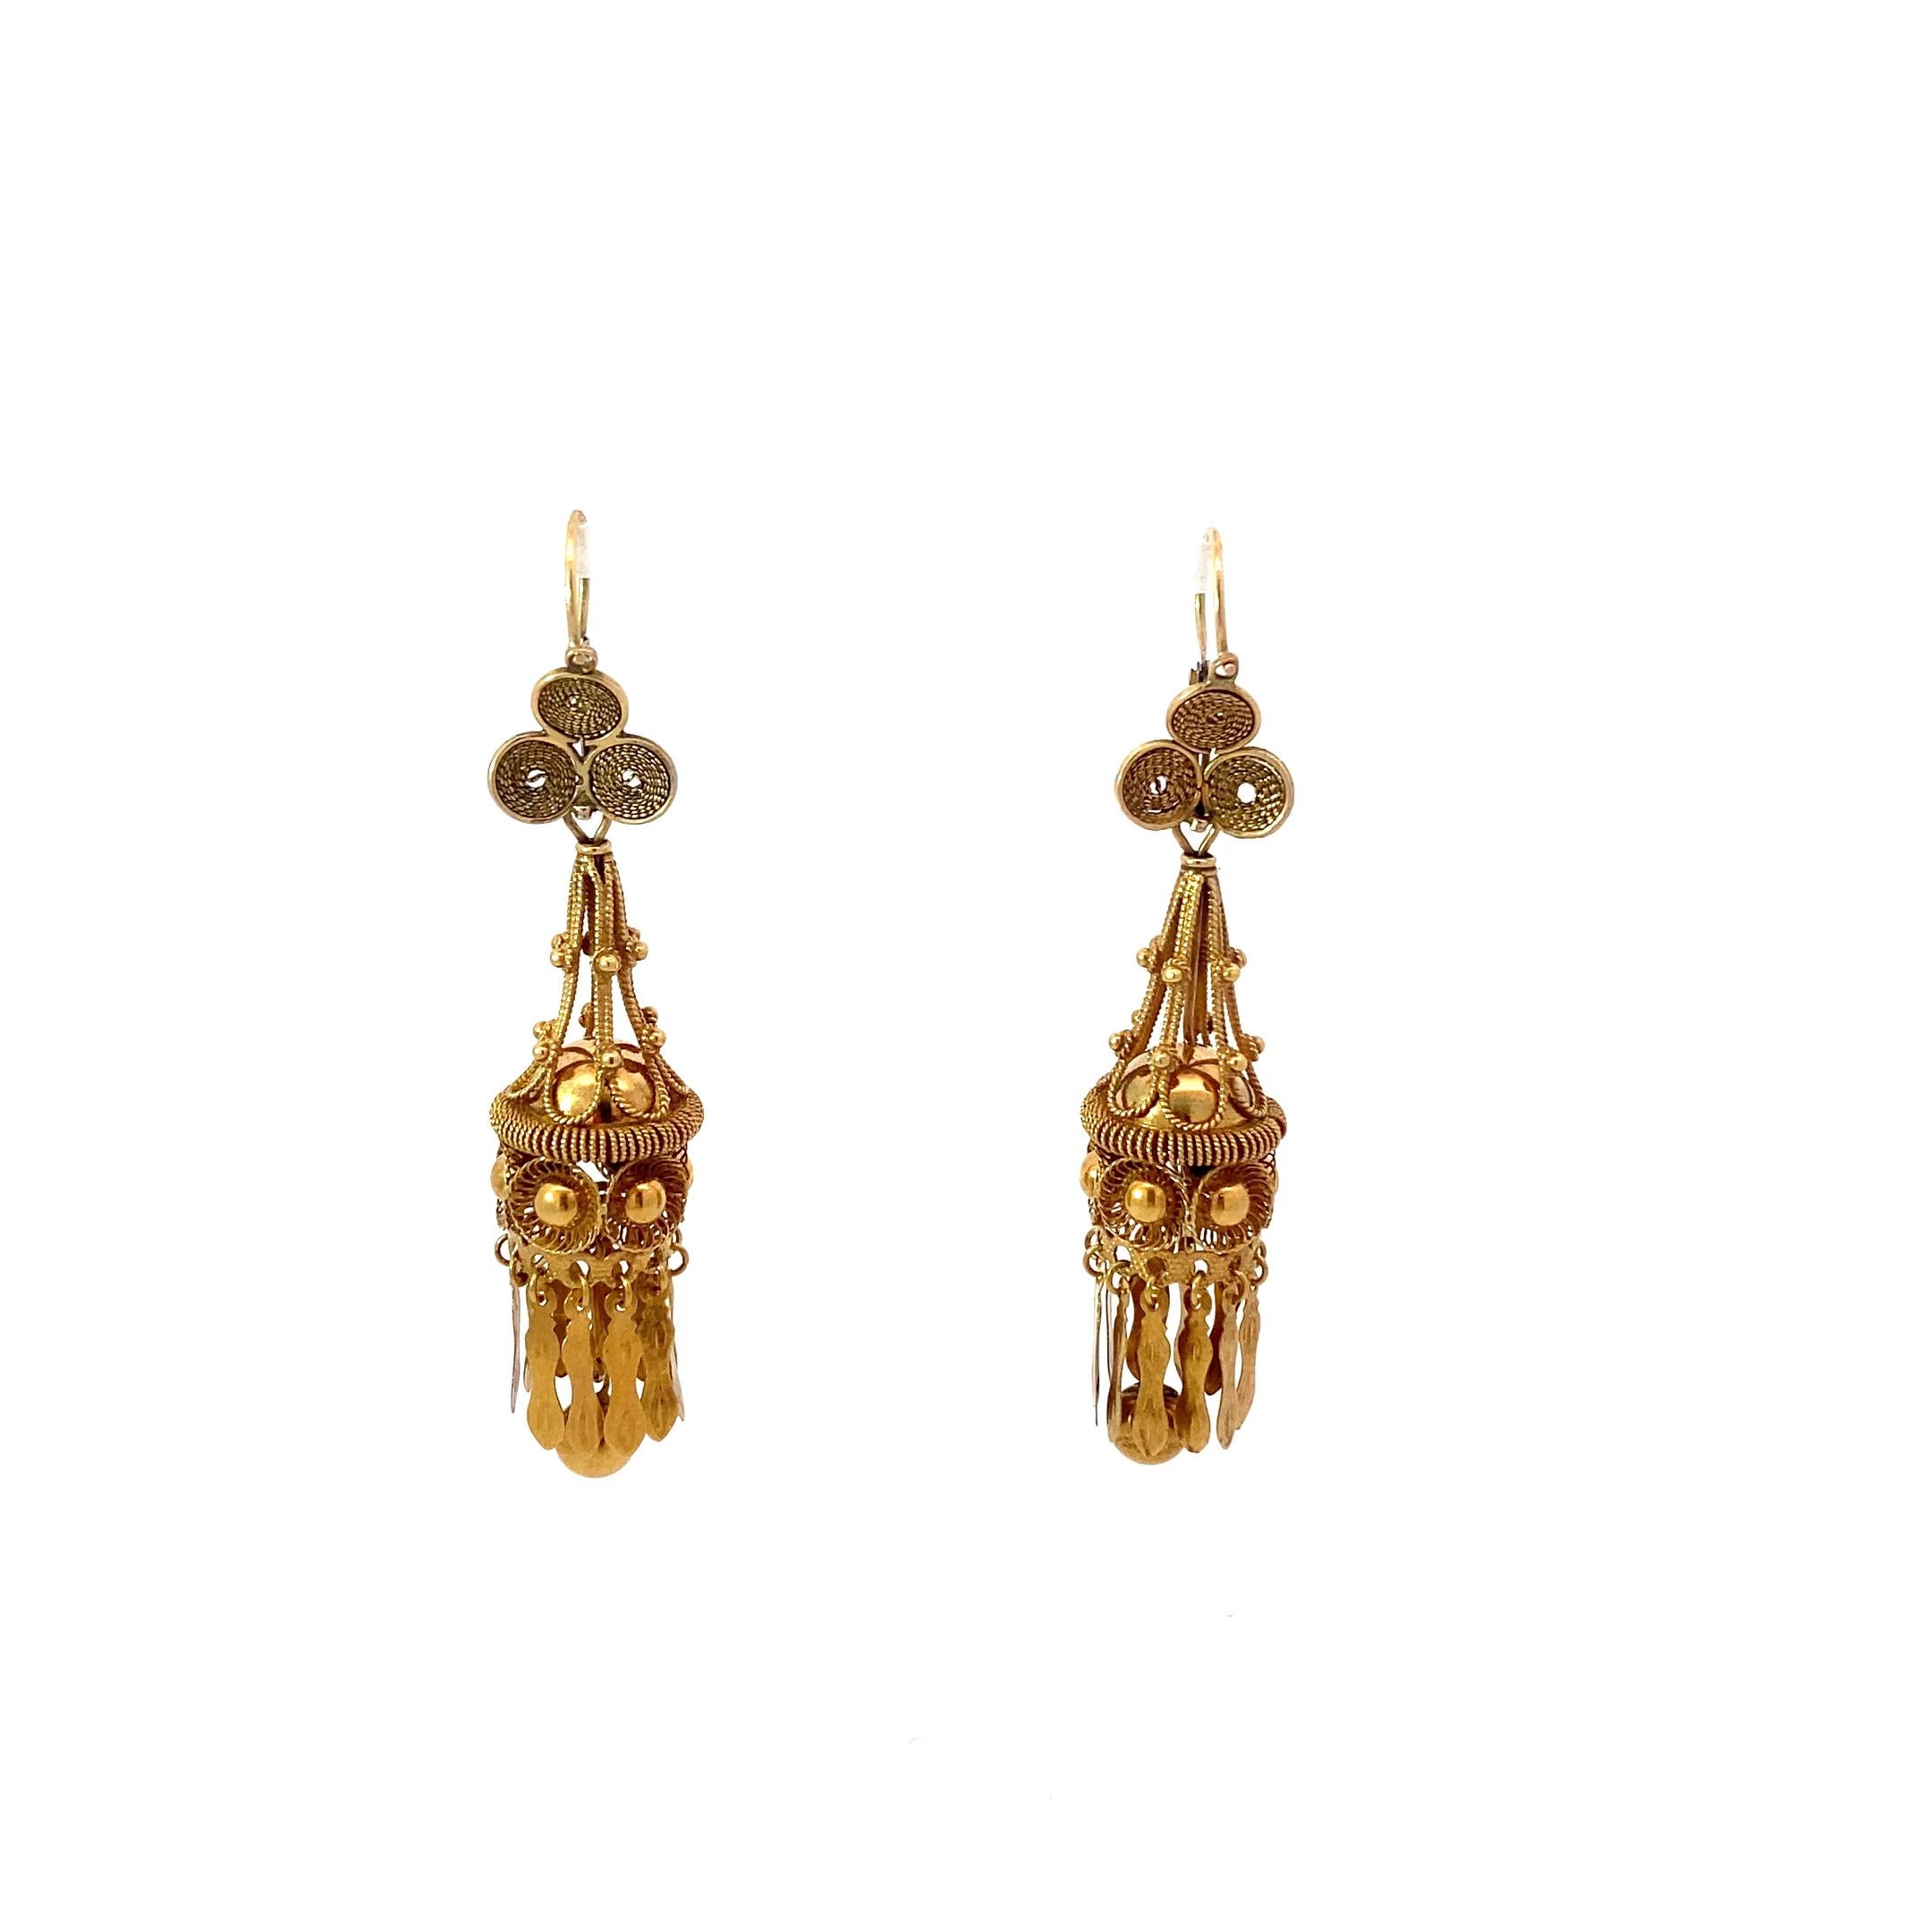 unique convertible earrings dating from the Victorian period. These 15k gold earrings feature a great amount of detail work. The chandelier drops are detachable from the lever back earring giving you two ways to wear this special piece. The tassel